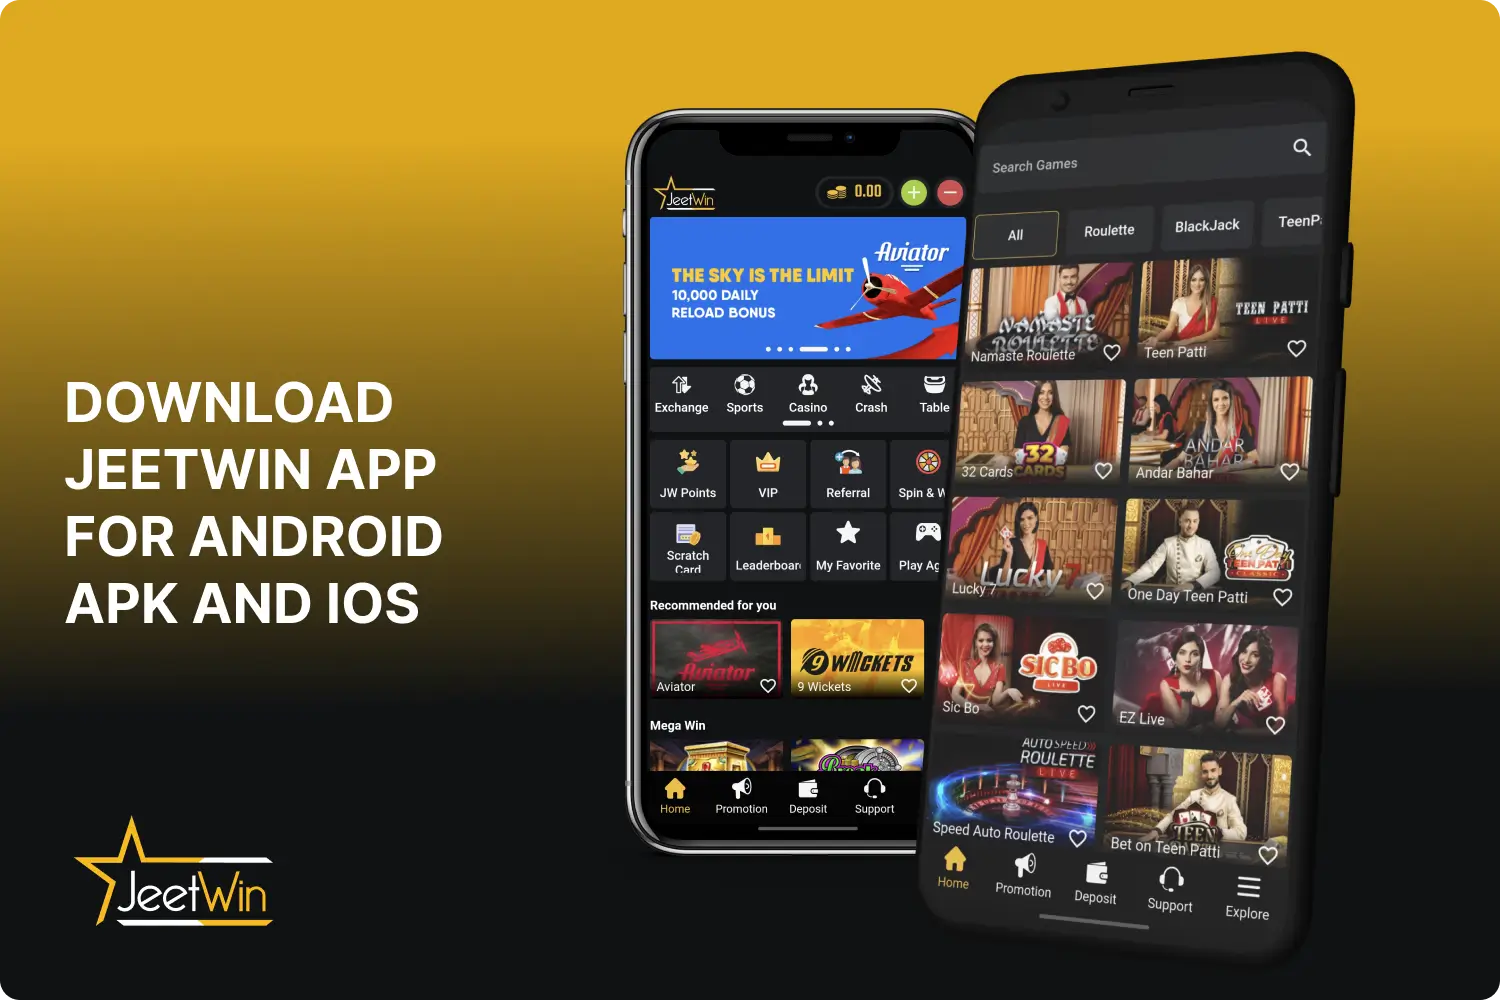 The Jeetwin app for android apk and ios is available for download in India completely free of charge